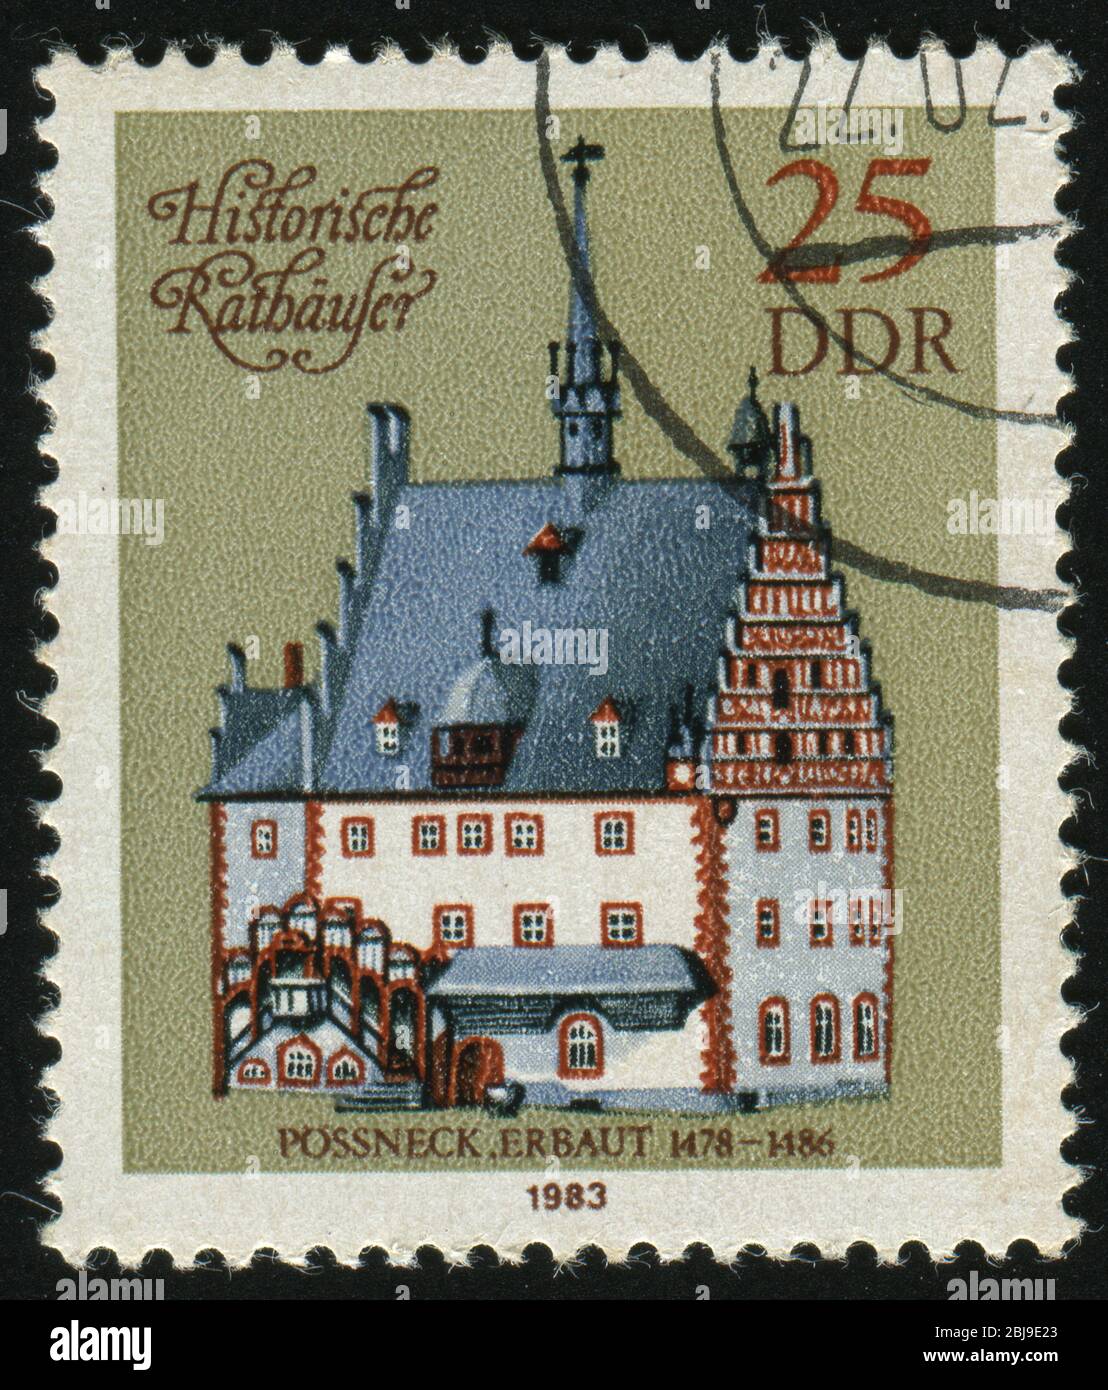 GERMANY- CIRCA 1983: stamp printed by Germany, shows old house, Possneck, circa 1983. Stock Photo